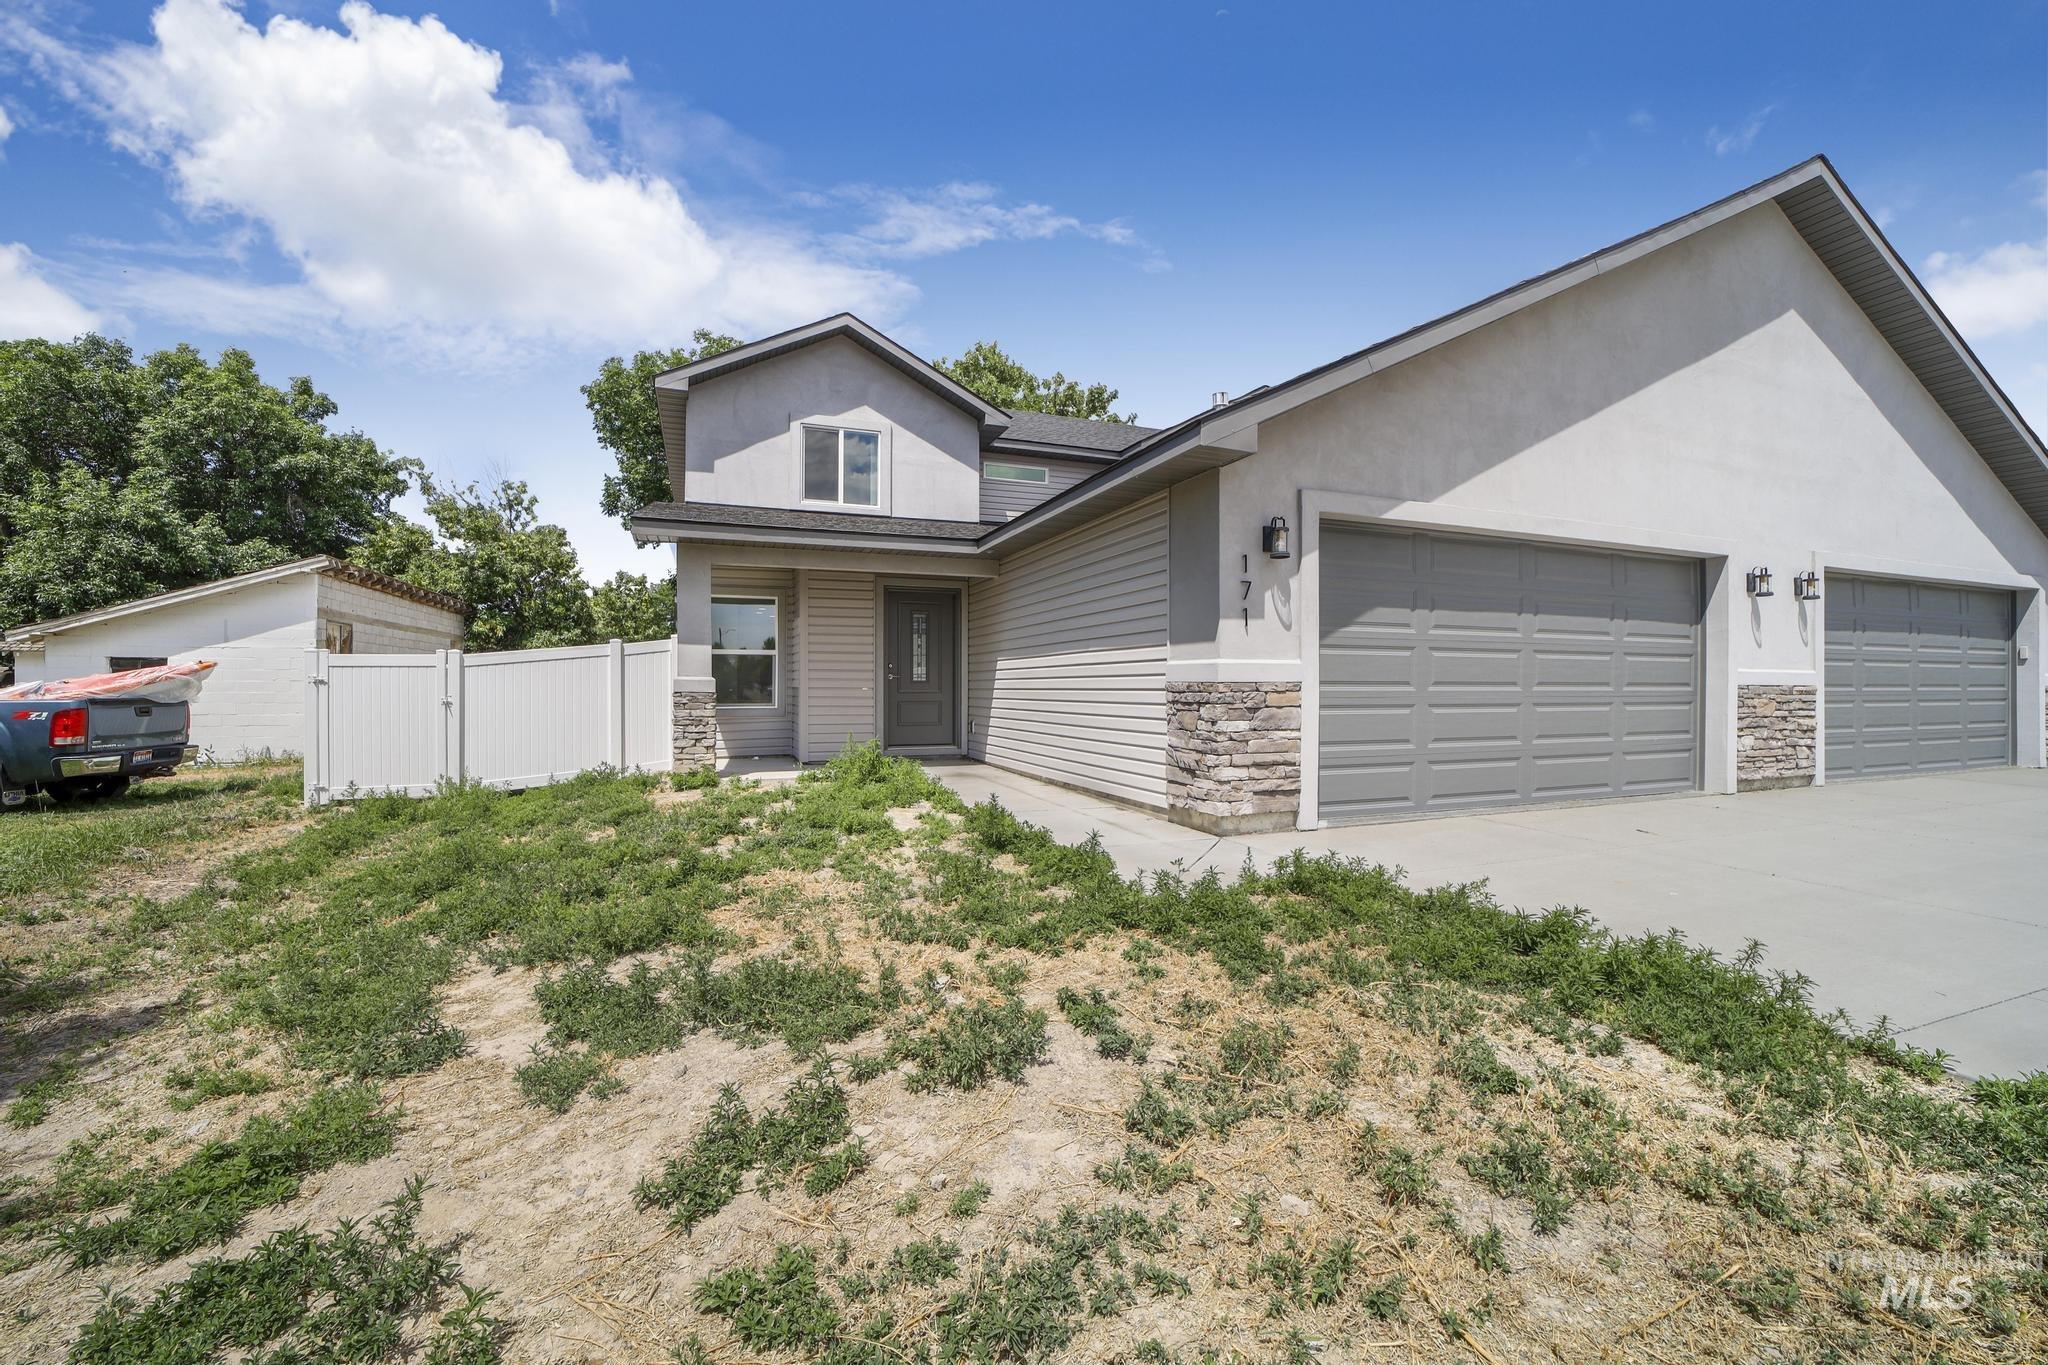 171 Woody Way, Jerome, Idaho 83338, 4 Bedrooms, 2.5 Bathrooms, Residential For Sale, Price $385,000,MLS 98883431